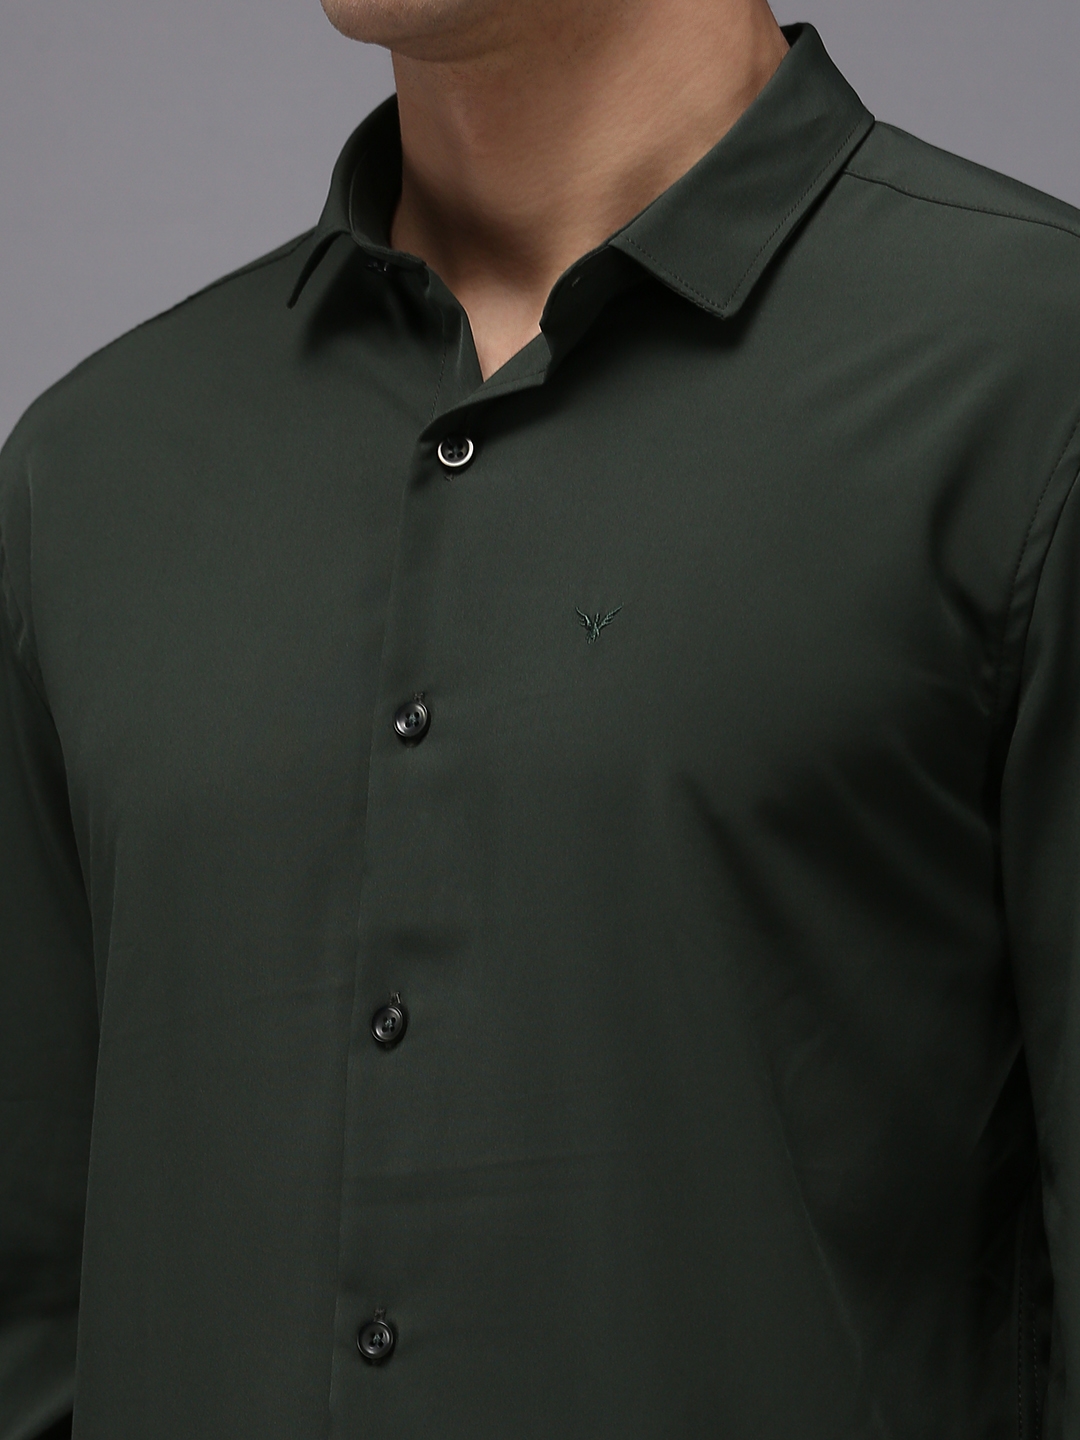 Men's Green Polyester Solid Casual Shirts